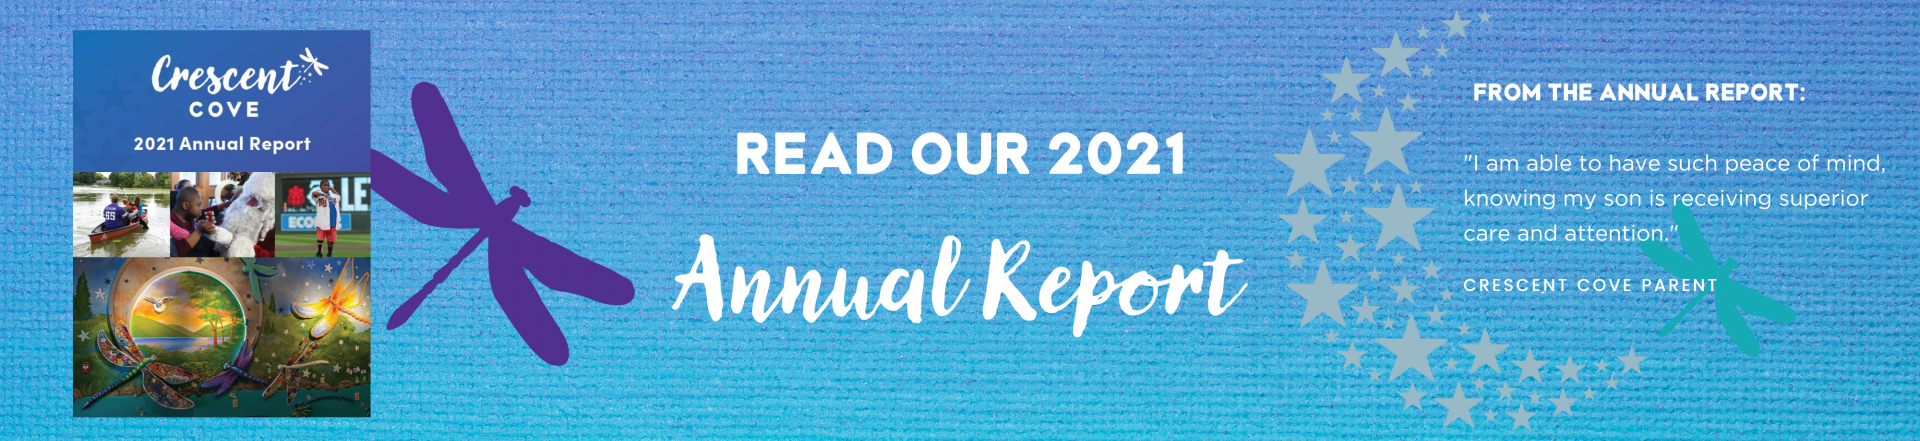 2021-annual-report-slider.png